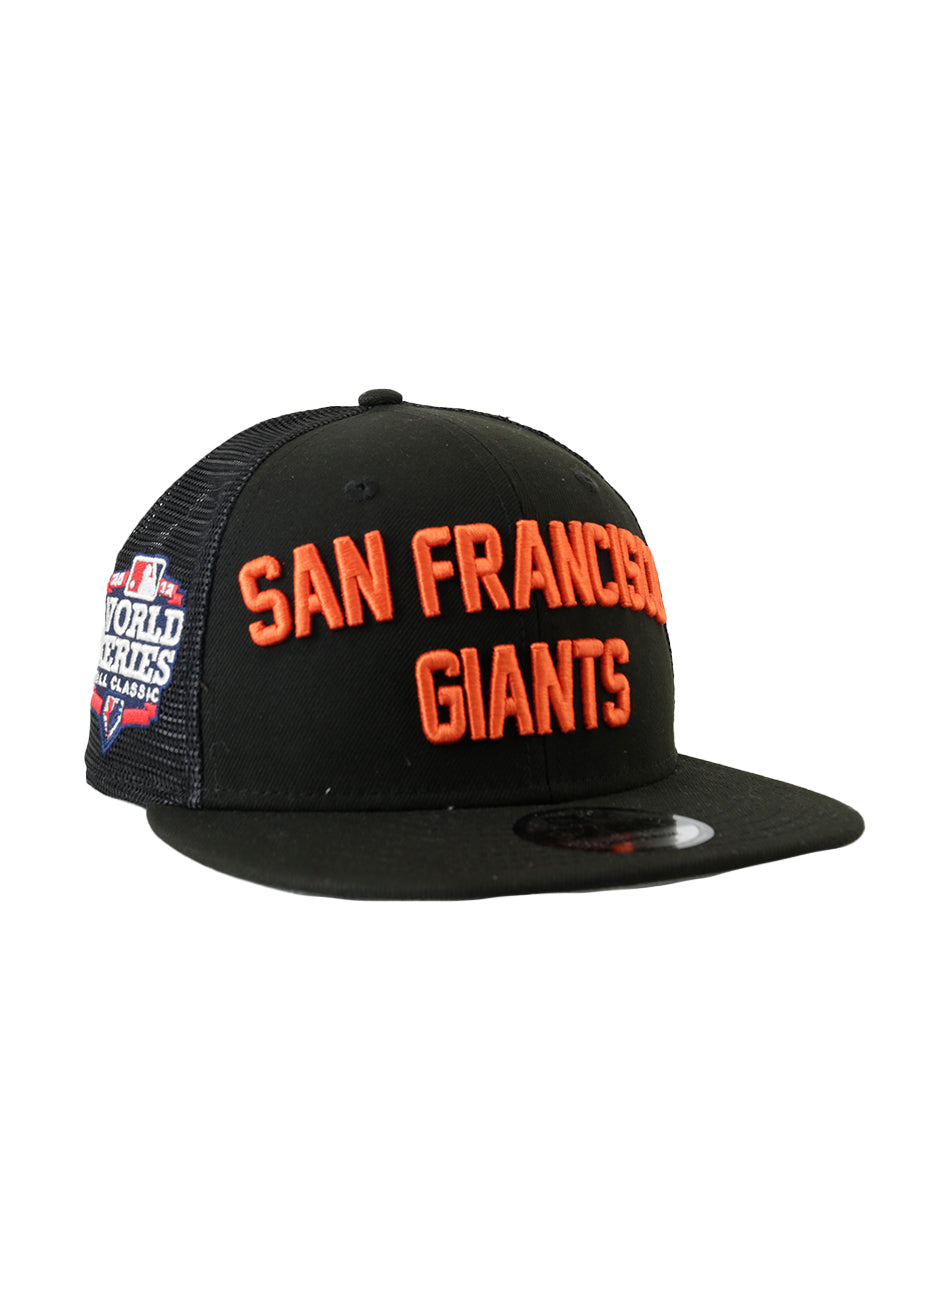 SF Giants Stacked 9Fifty Snap-Back Hat